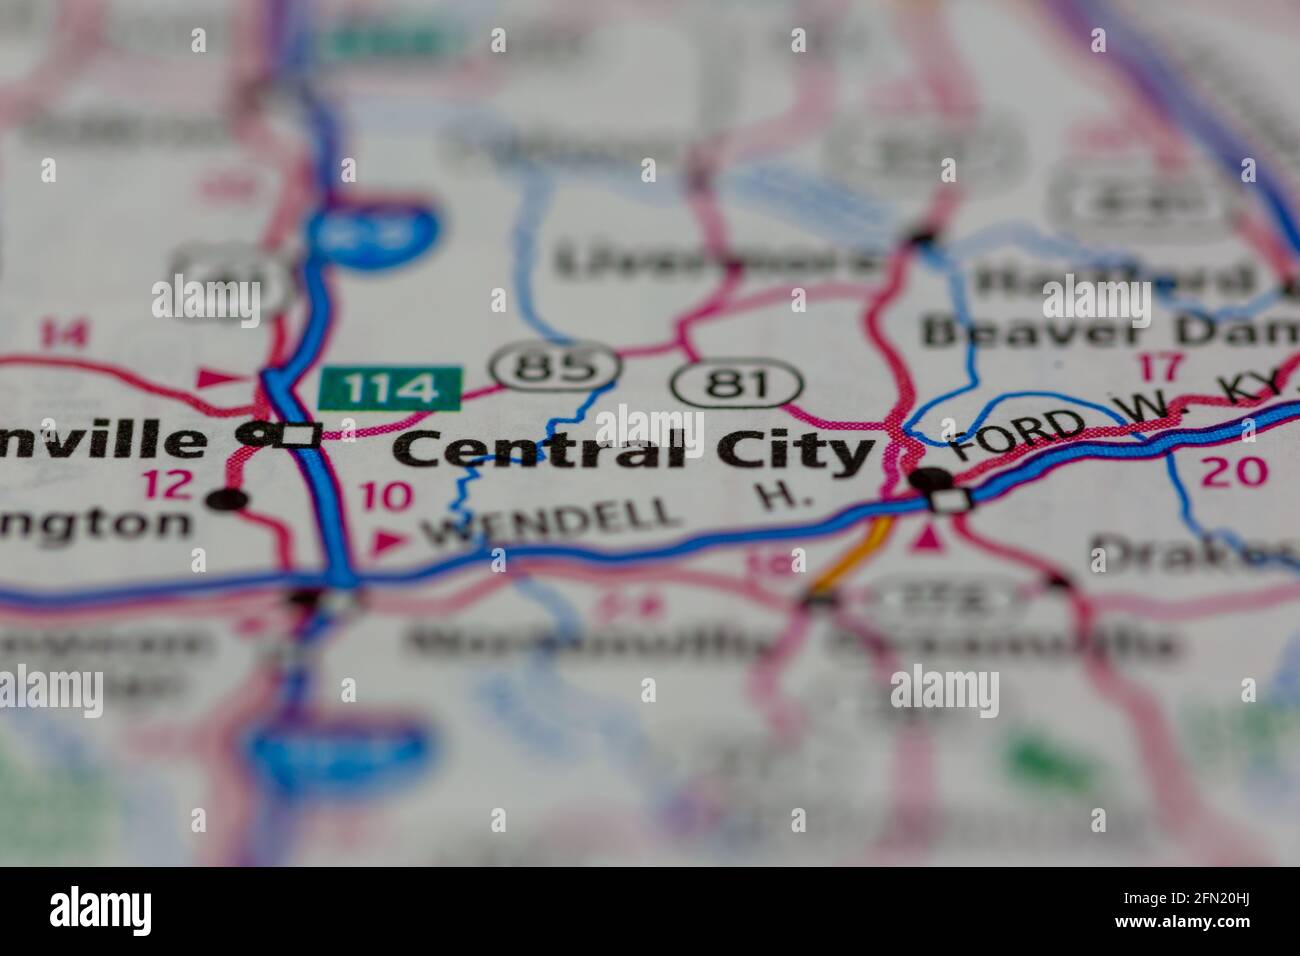 Central City Kentucky USA shown on a Geography map or road map Stock Photo